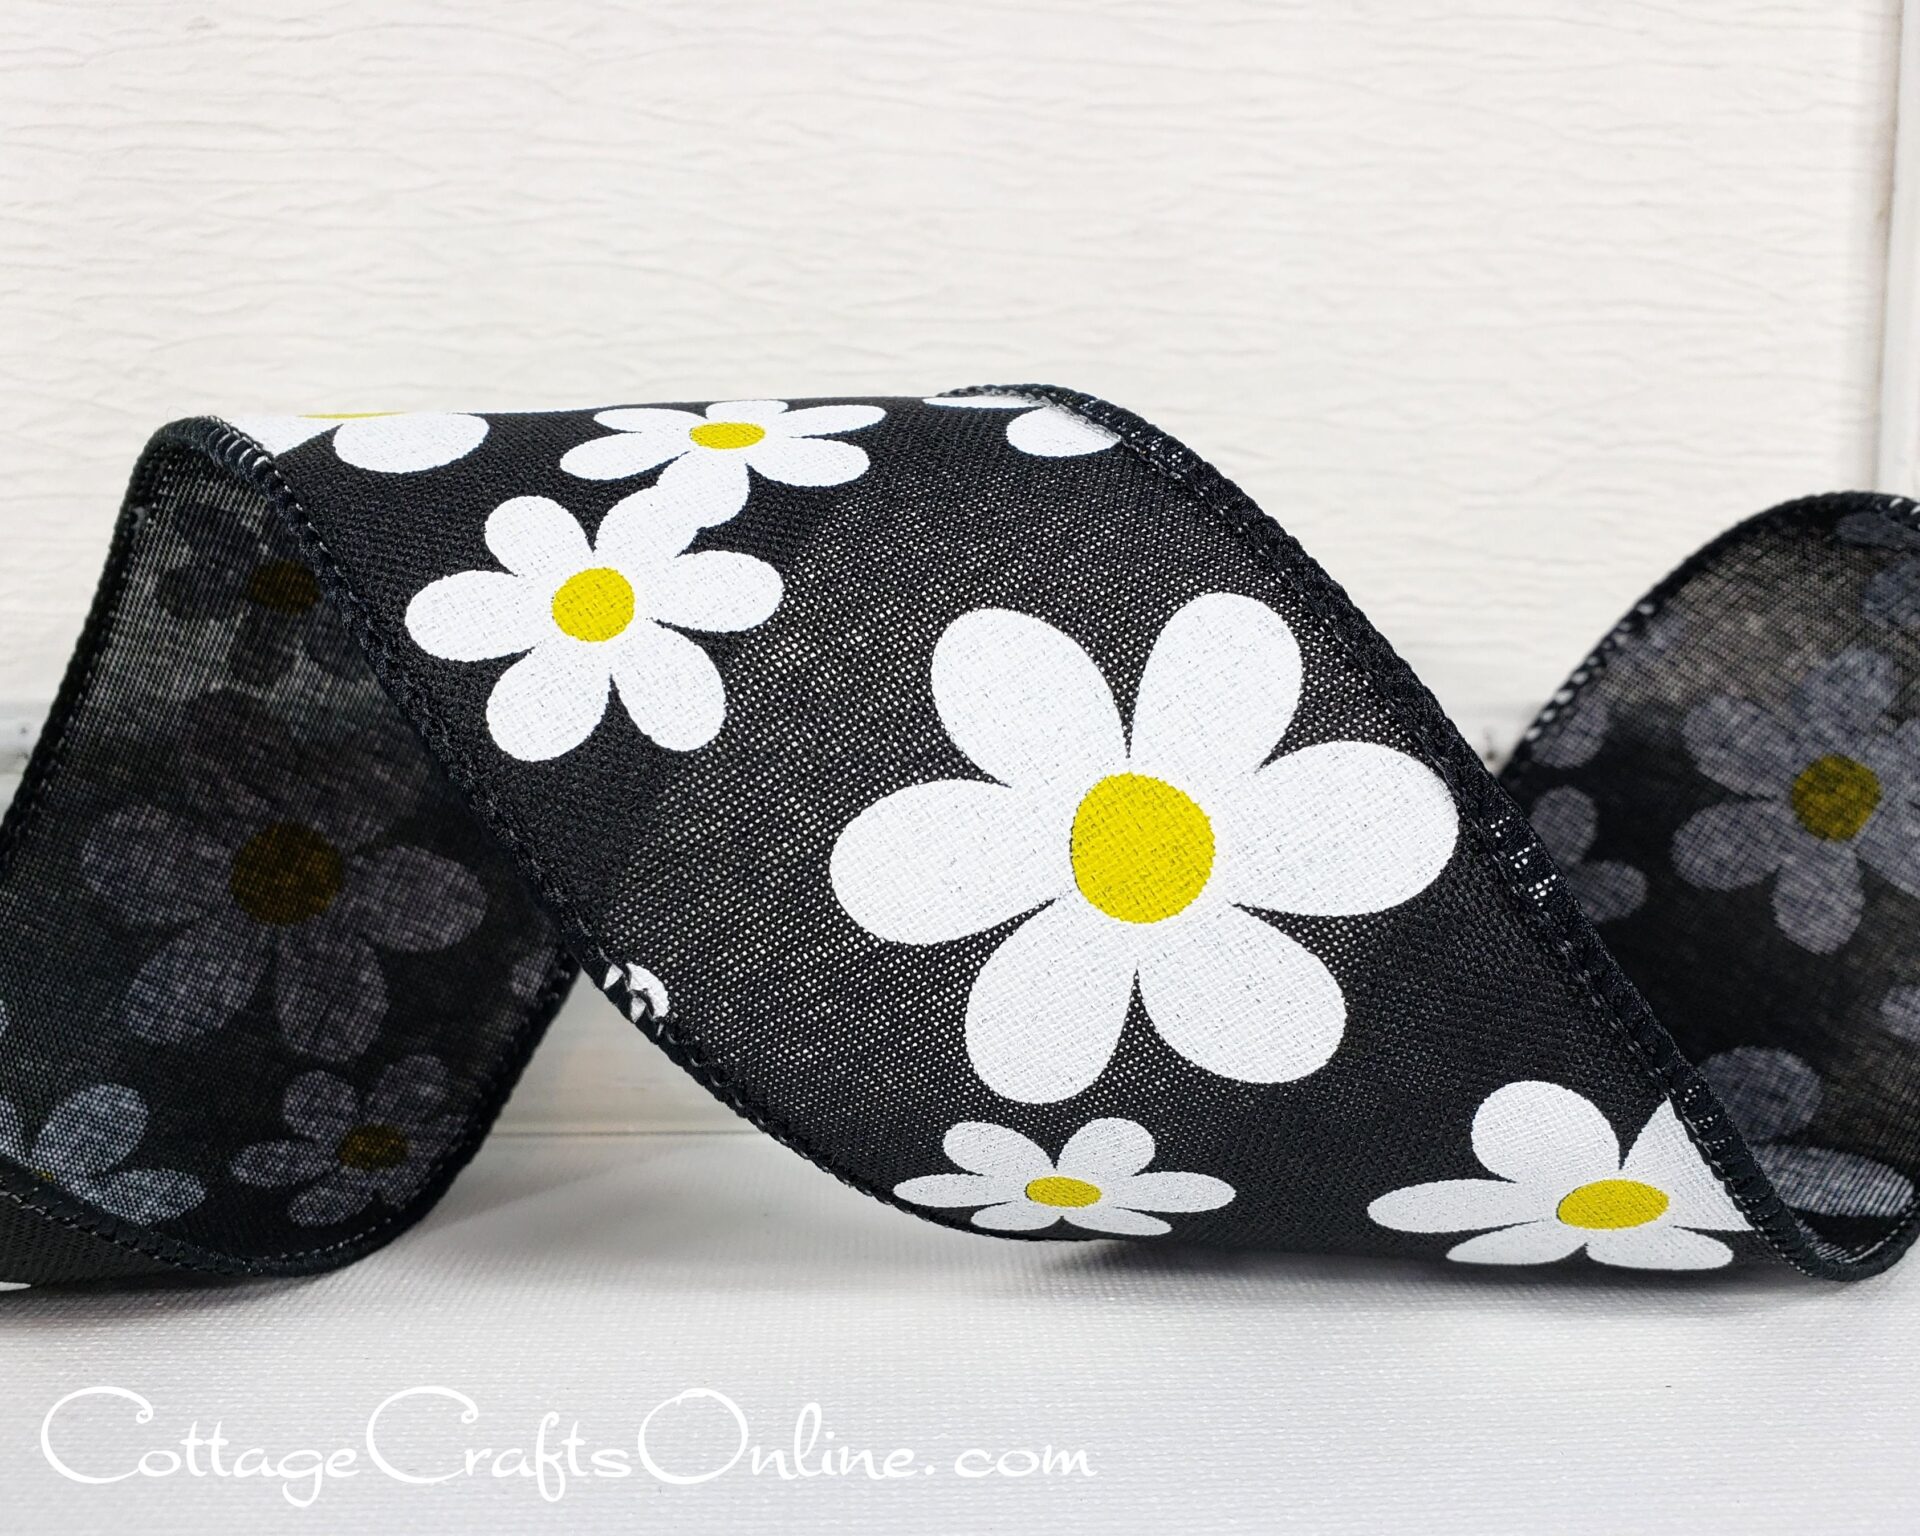 A black ribbon with white and yellow flowers.